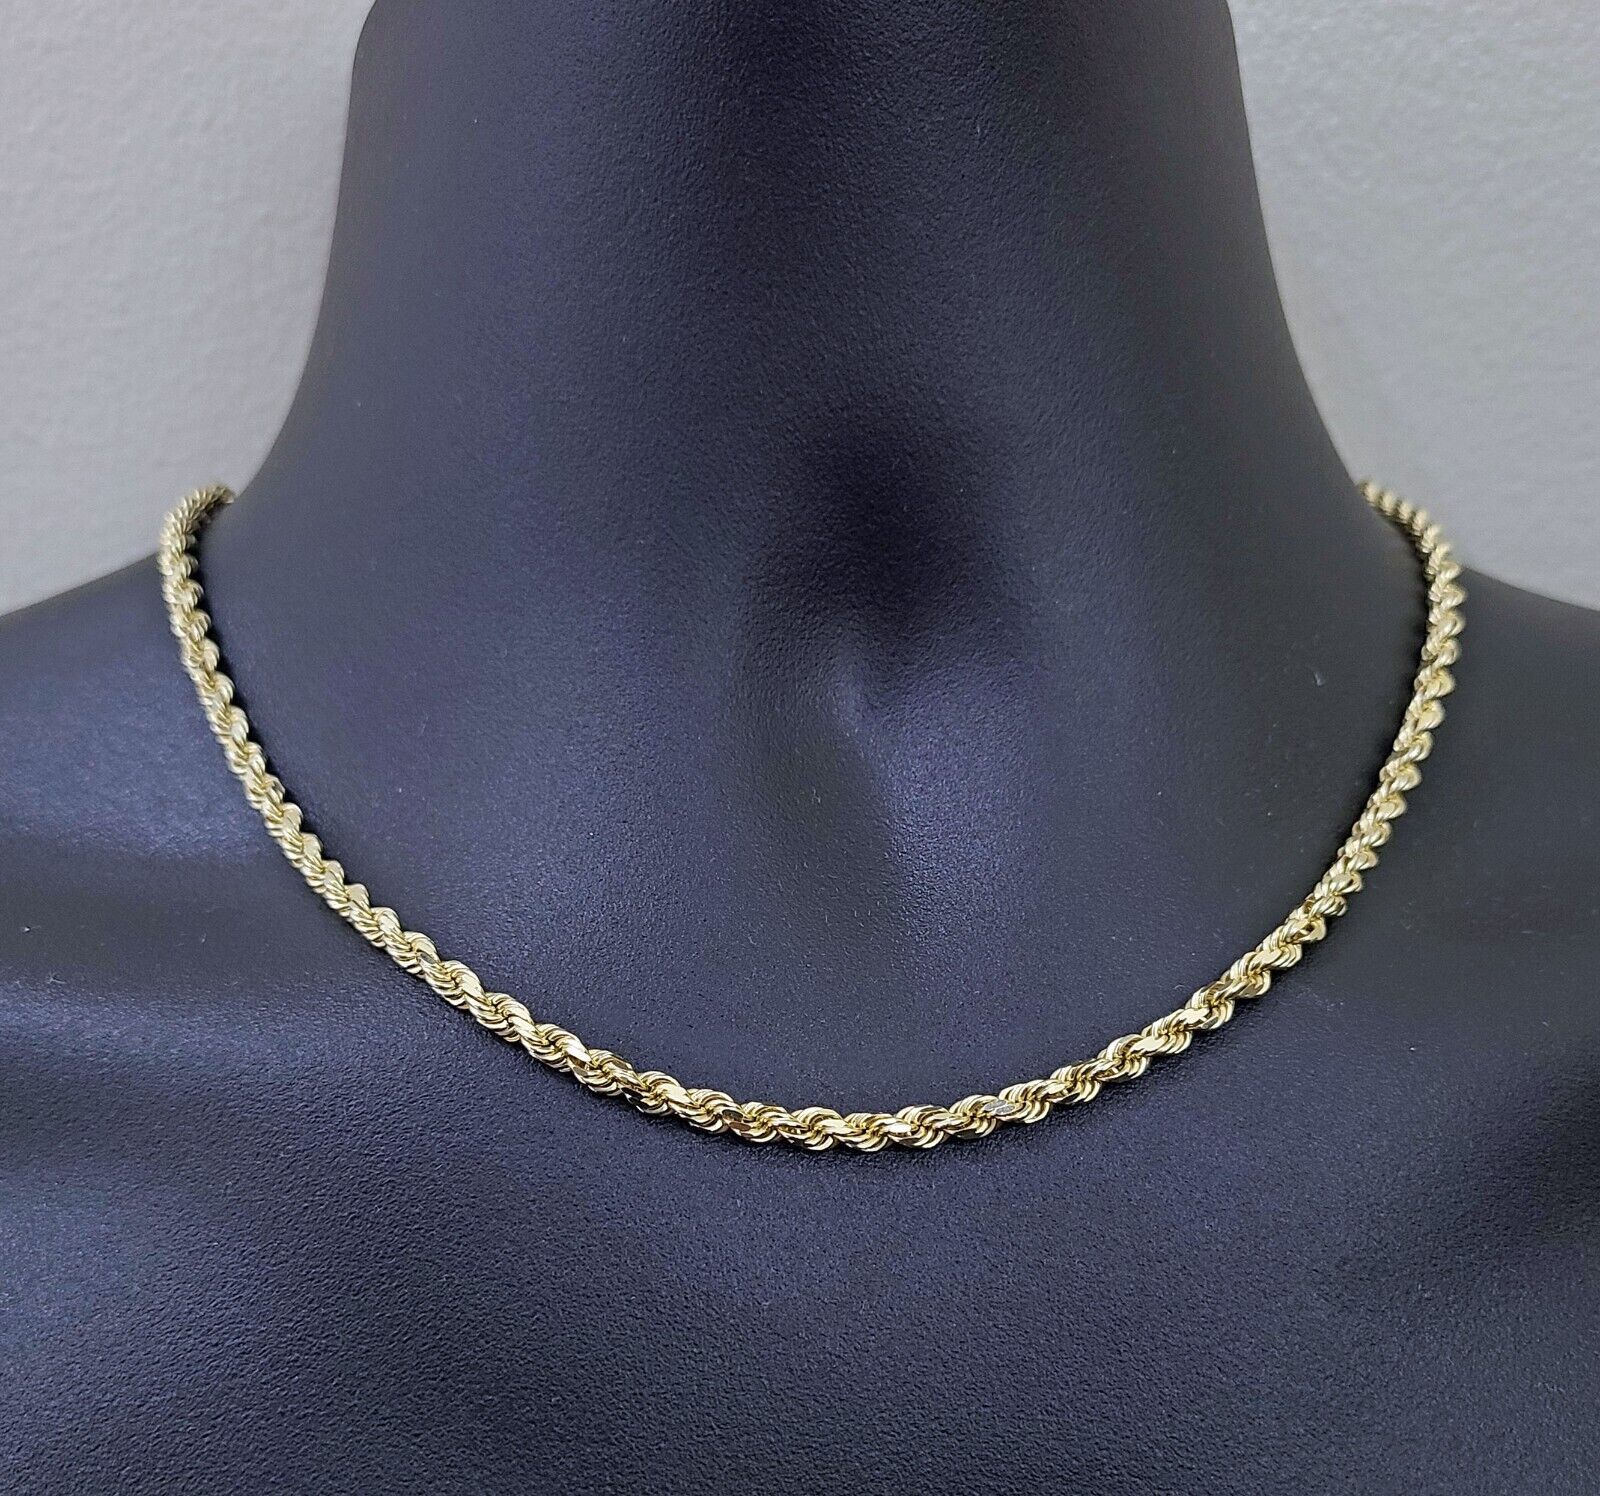 Solid White Gold Rope Chain 10k - 14k